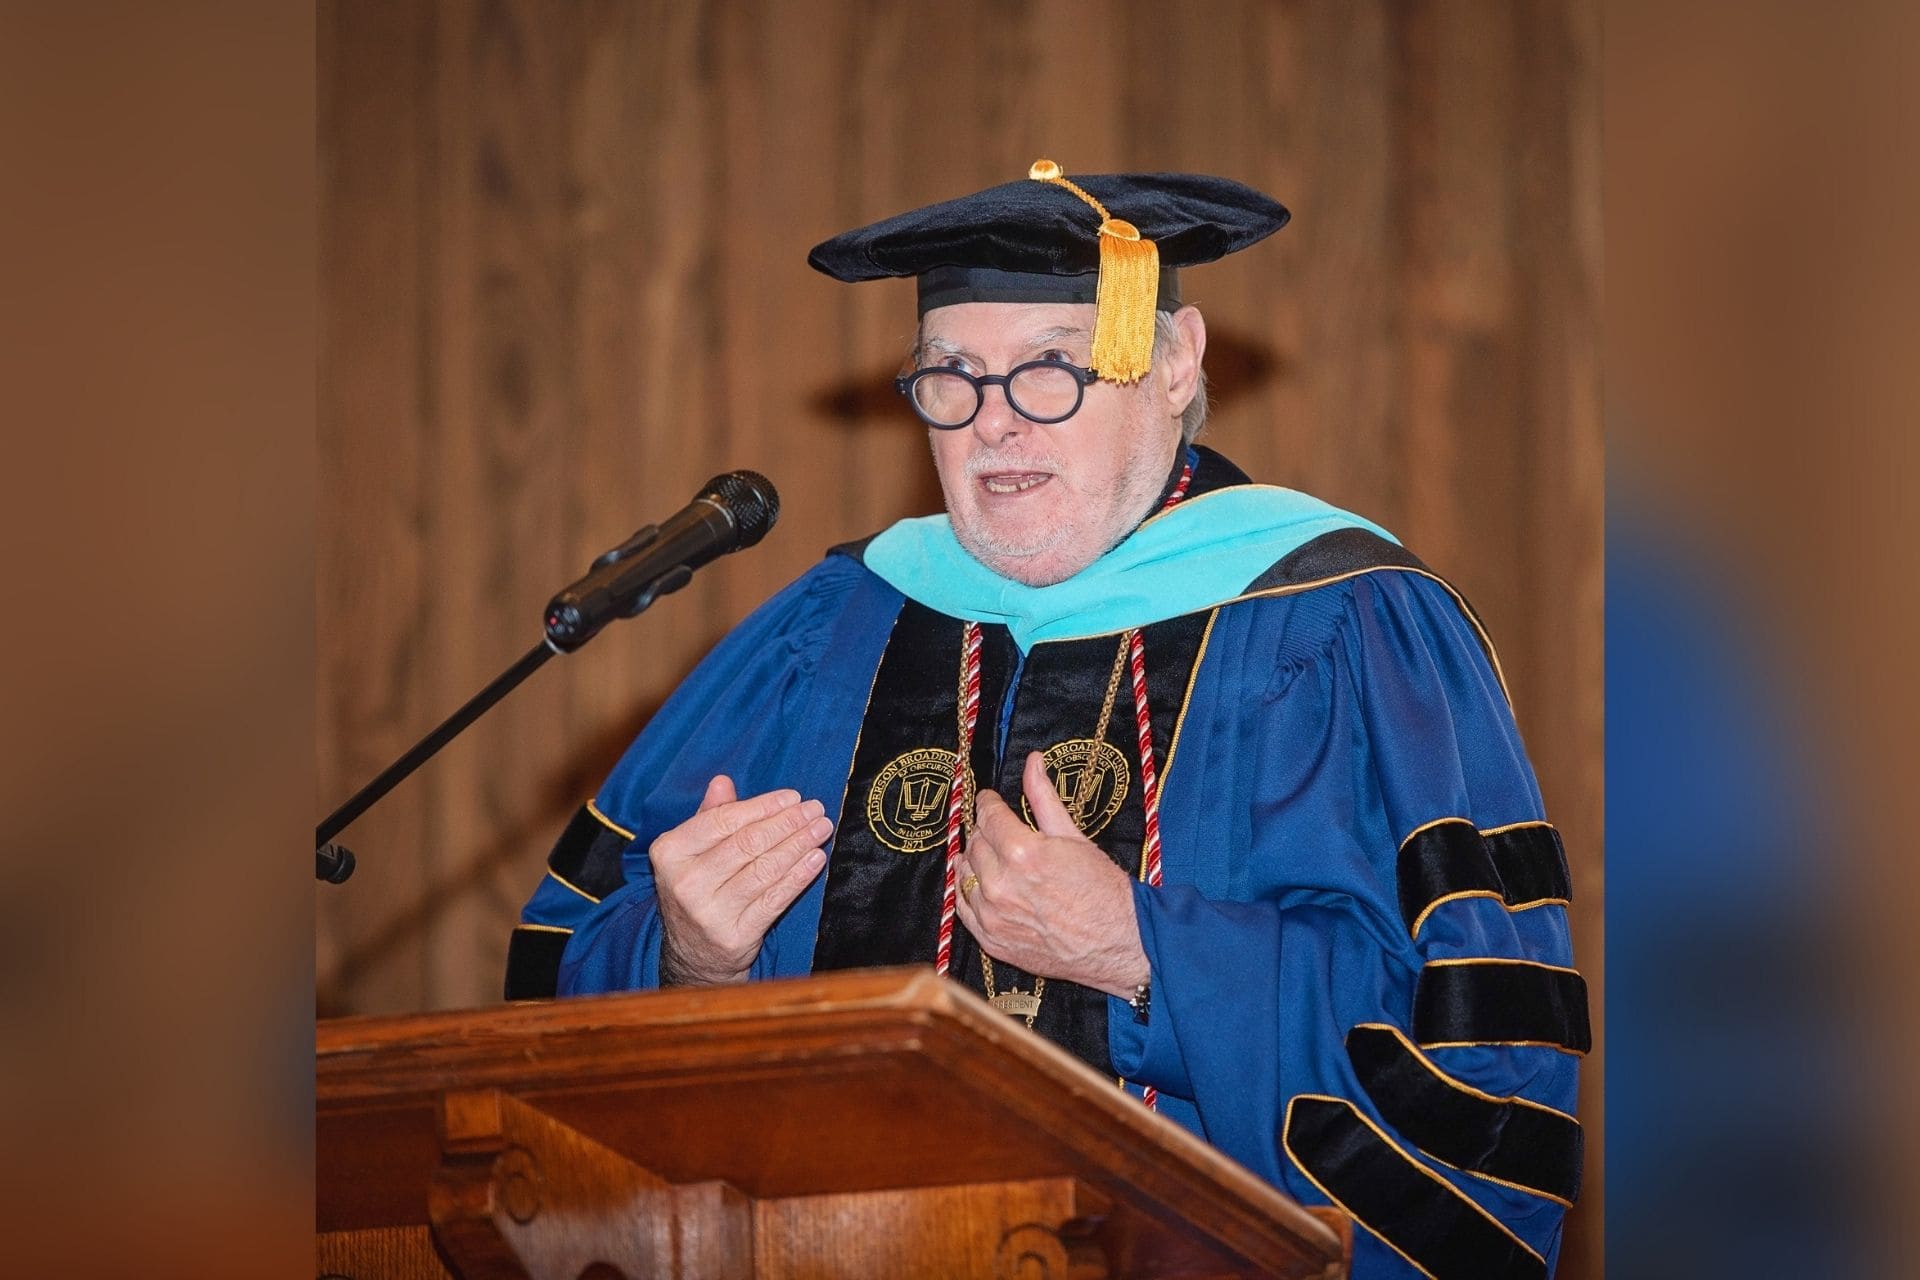 President Dr. James “Tim” Barry addresses the most academically distinguished students earning awards at the 68th Honors Convocation on AB’s campus.